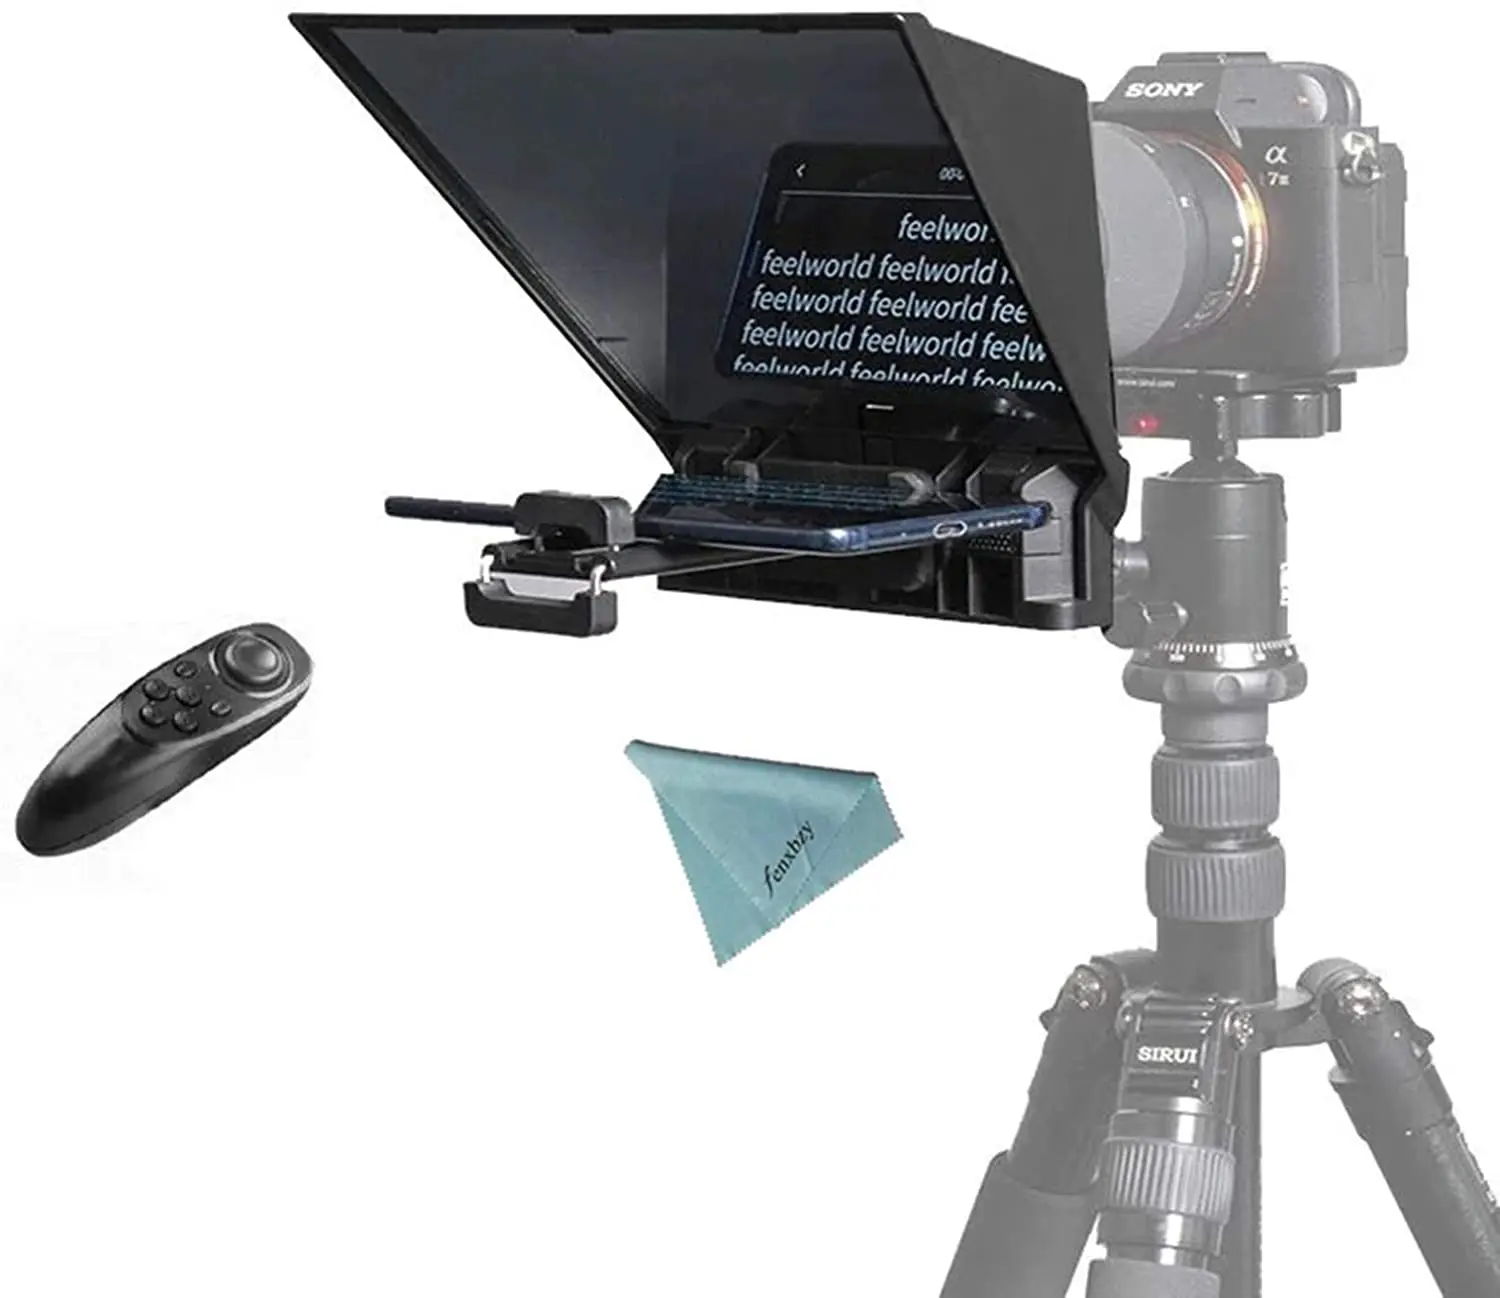 

Portable Mobile Phone Teleprompter with Remote Control for Smartphone & DSLR Camera for Speech Live Interview Video Vlog